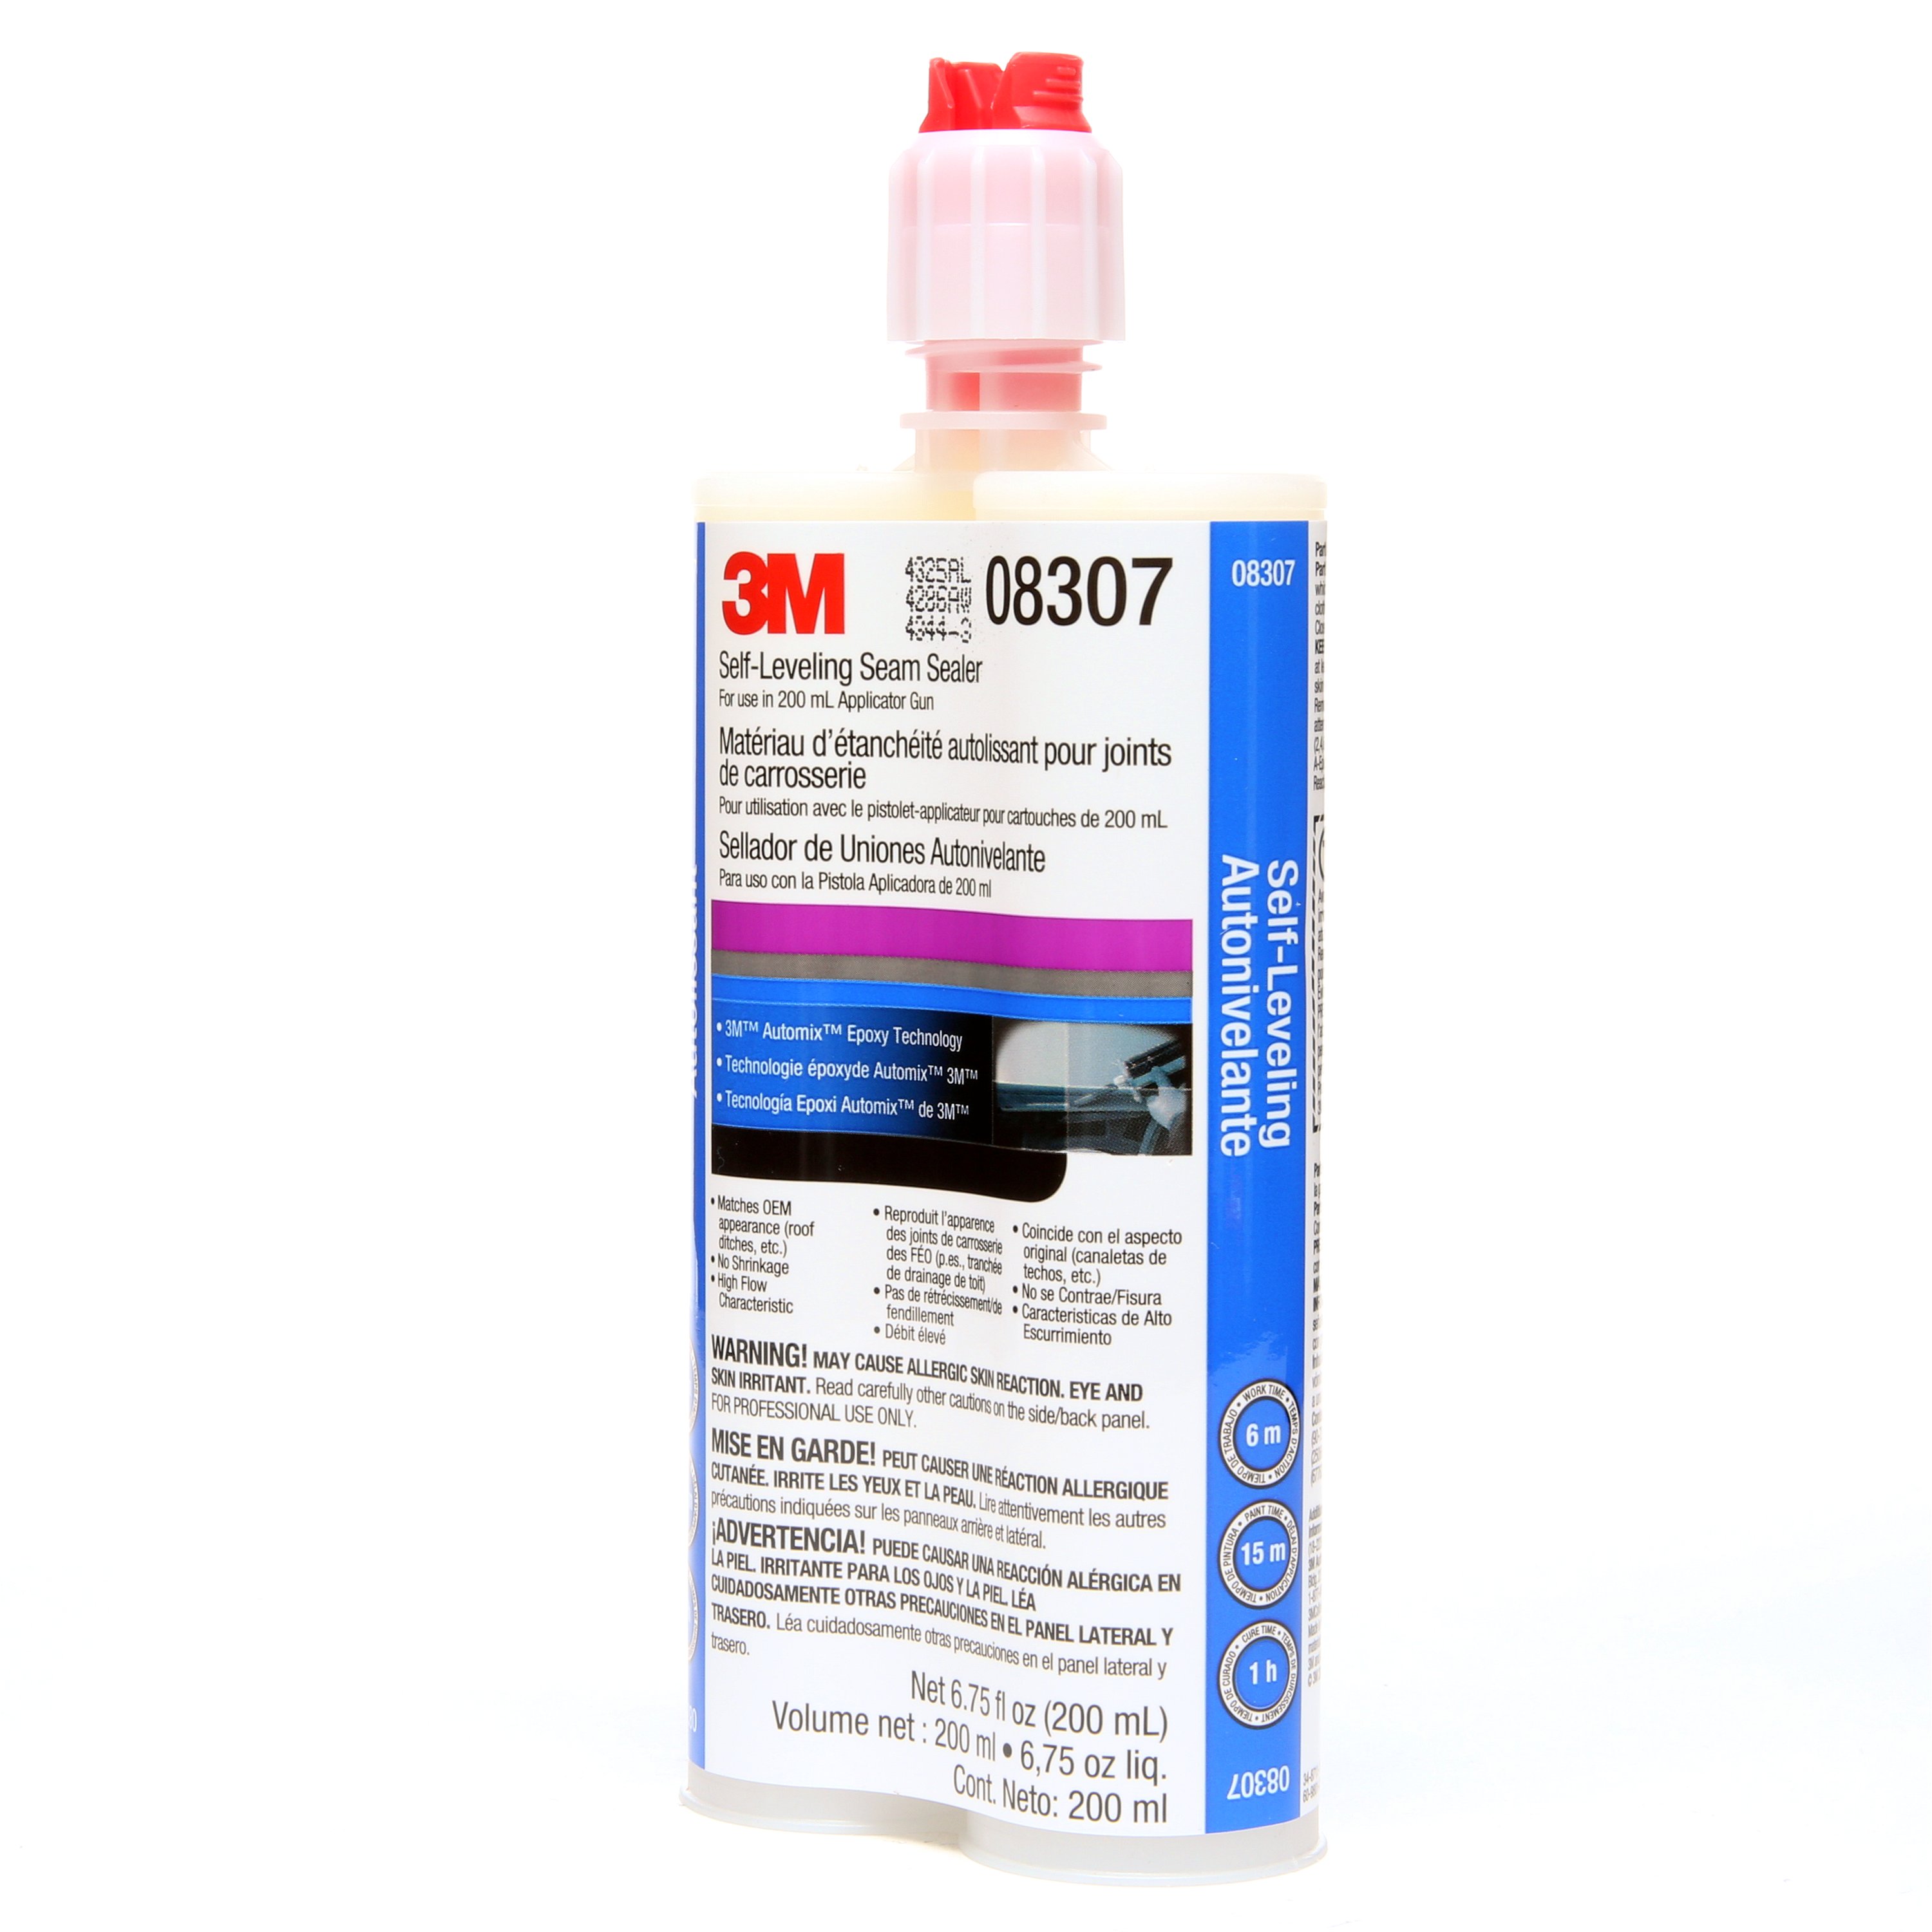 3M™ Self-Leveling Seam Sealer uses a flexible two-part epoxy technology to reliably seal seams in properly prepared metal enclosures in auto bodies.